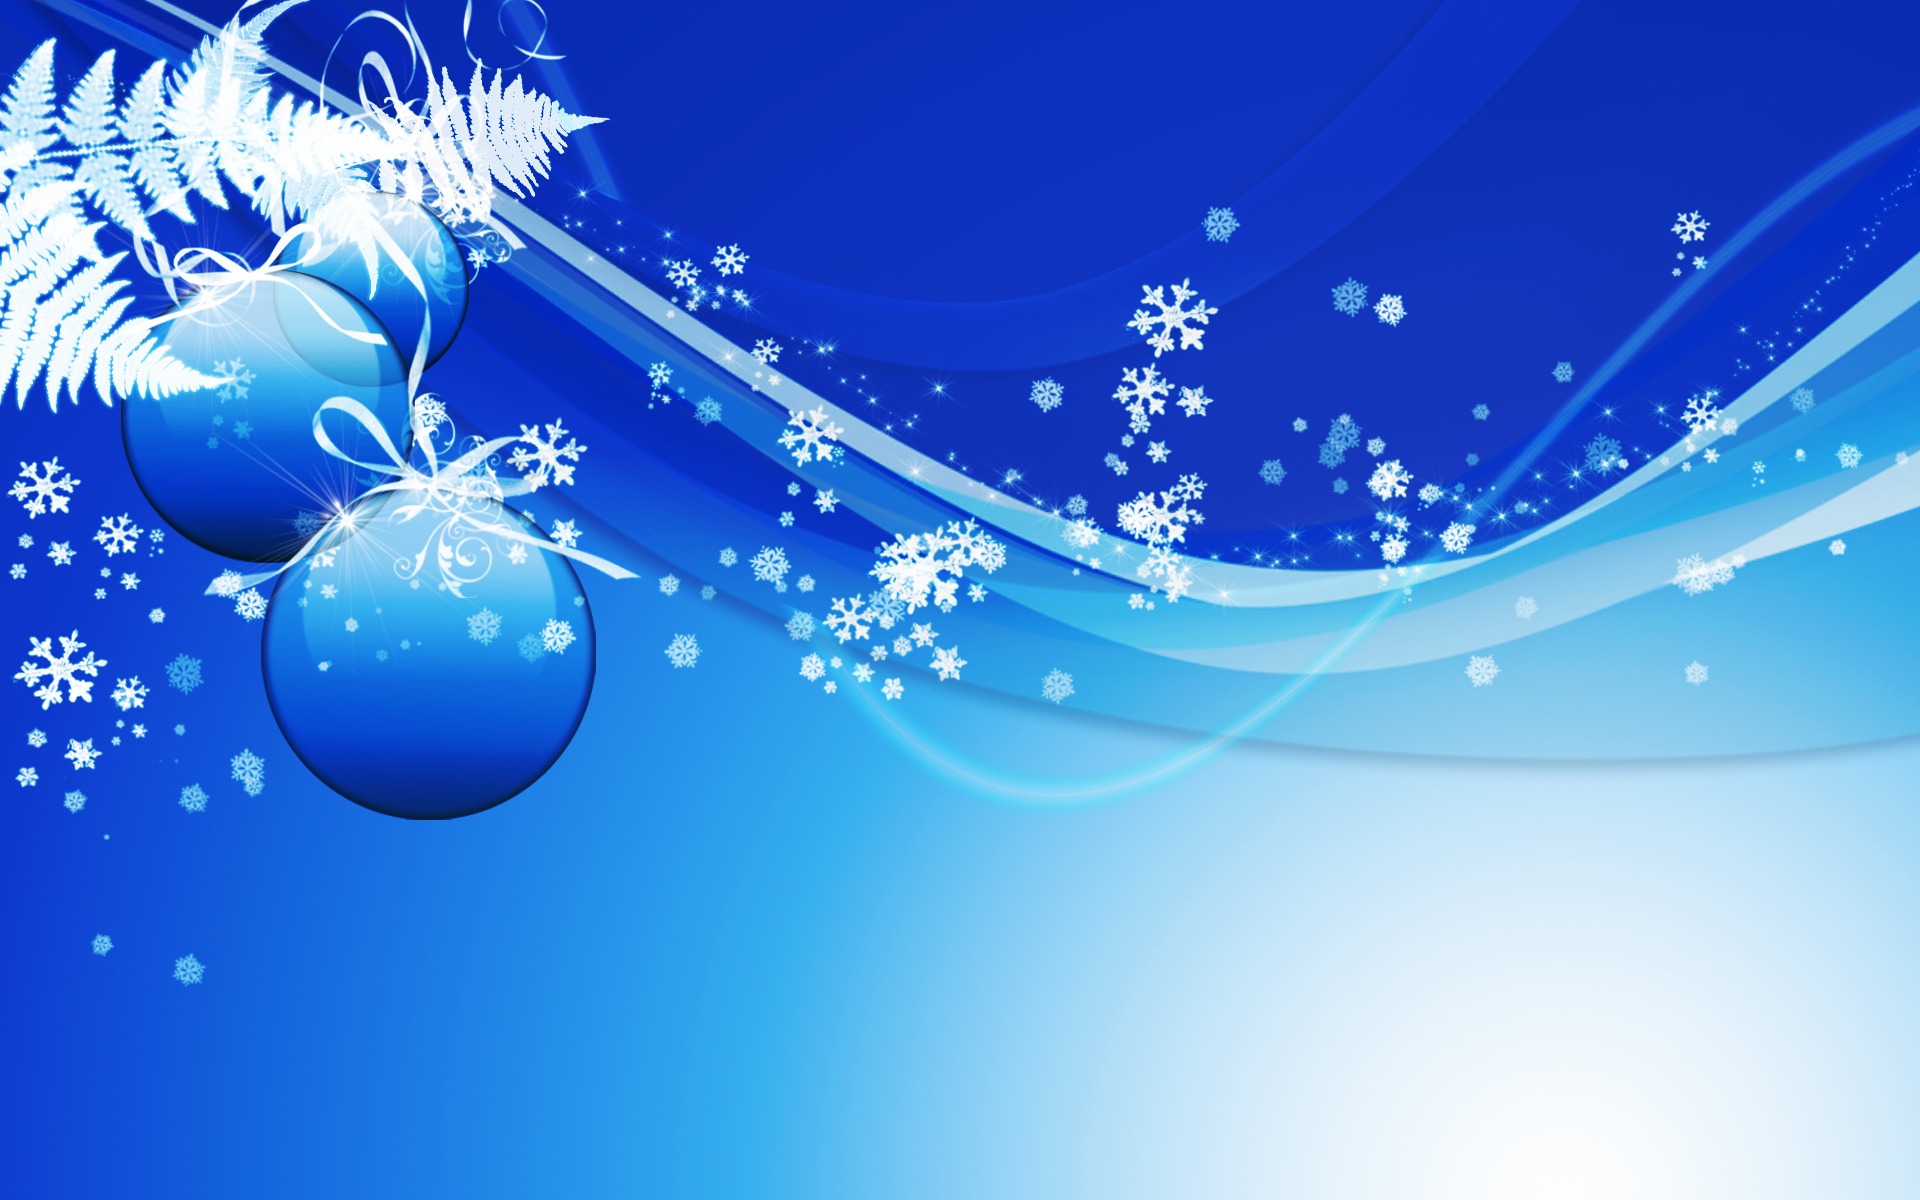 A Blue Christmas Wallpaper  Christmas Screensavers and Ch  Flickr